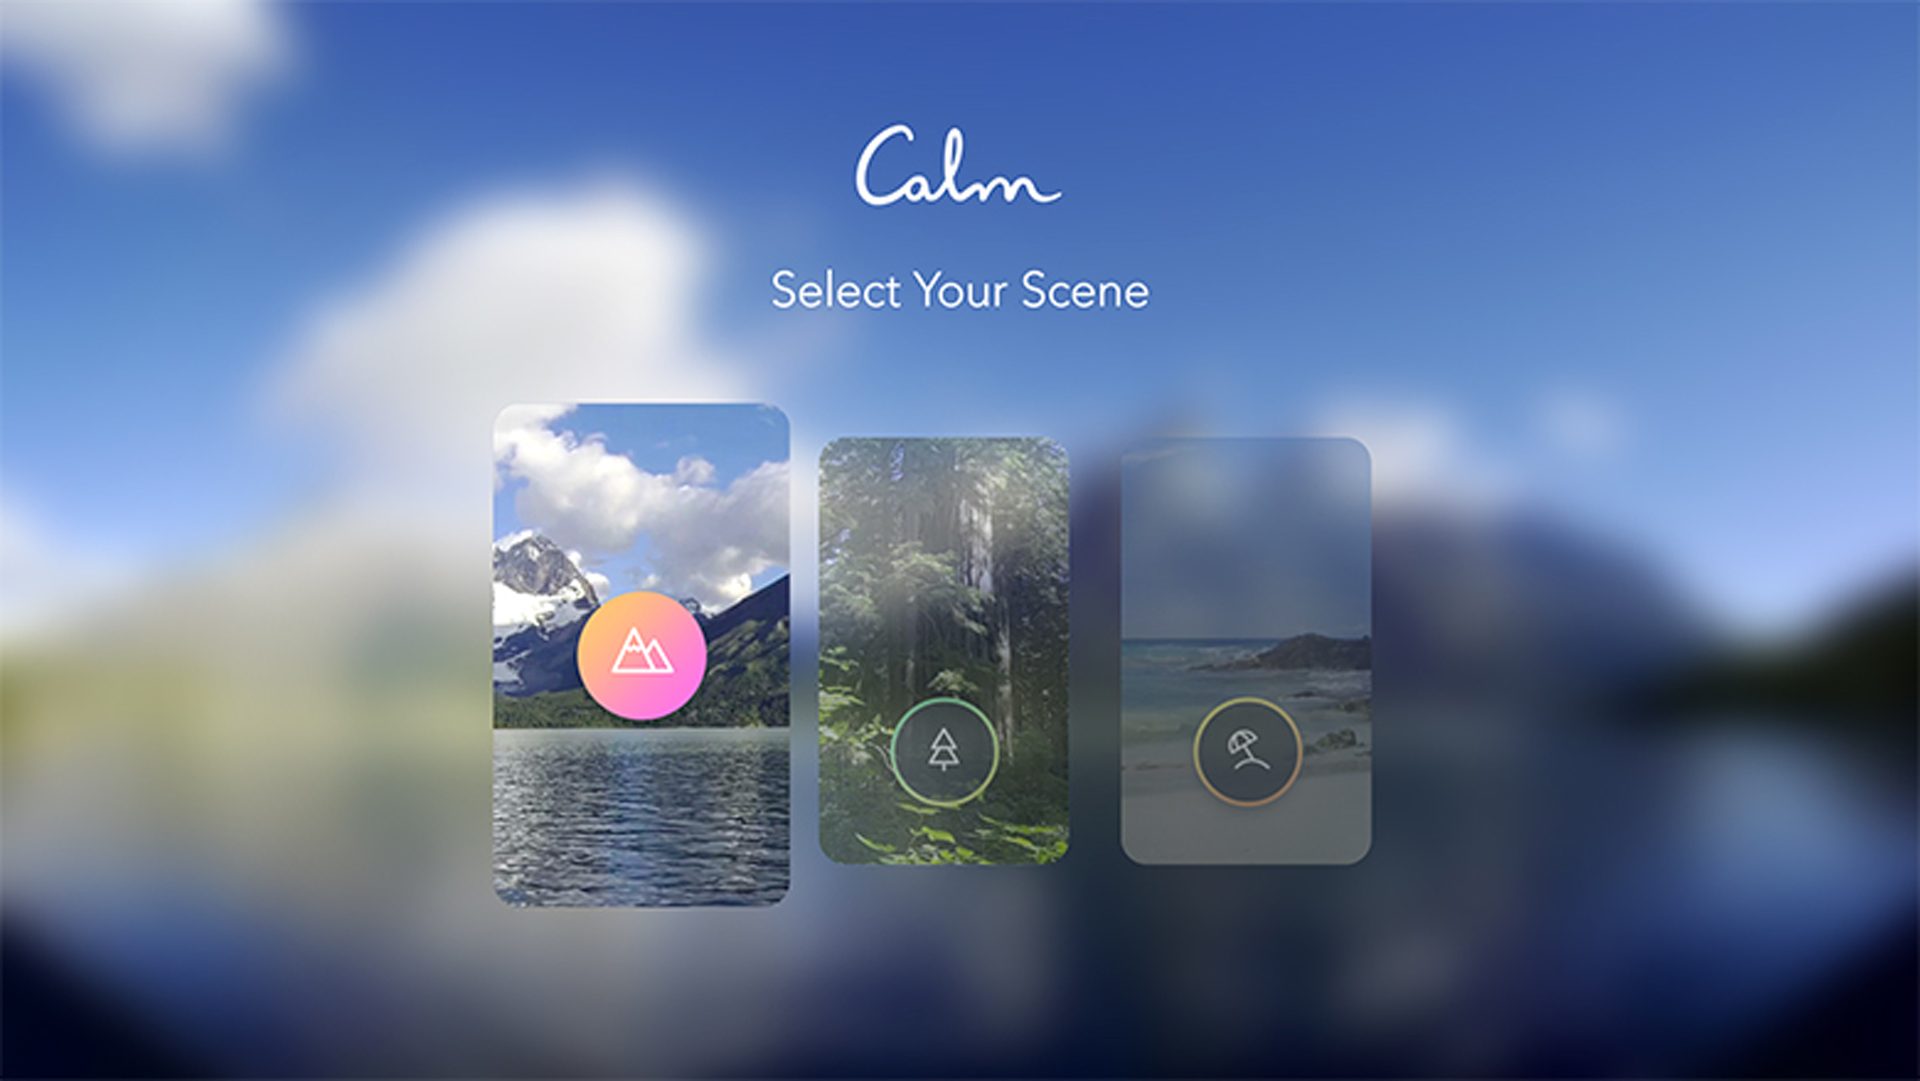 49 Top Images Calm Meditation App Free / Calm - Meditation Techniques for Sleep and Stress Reduction